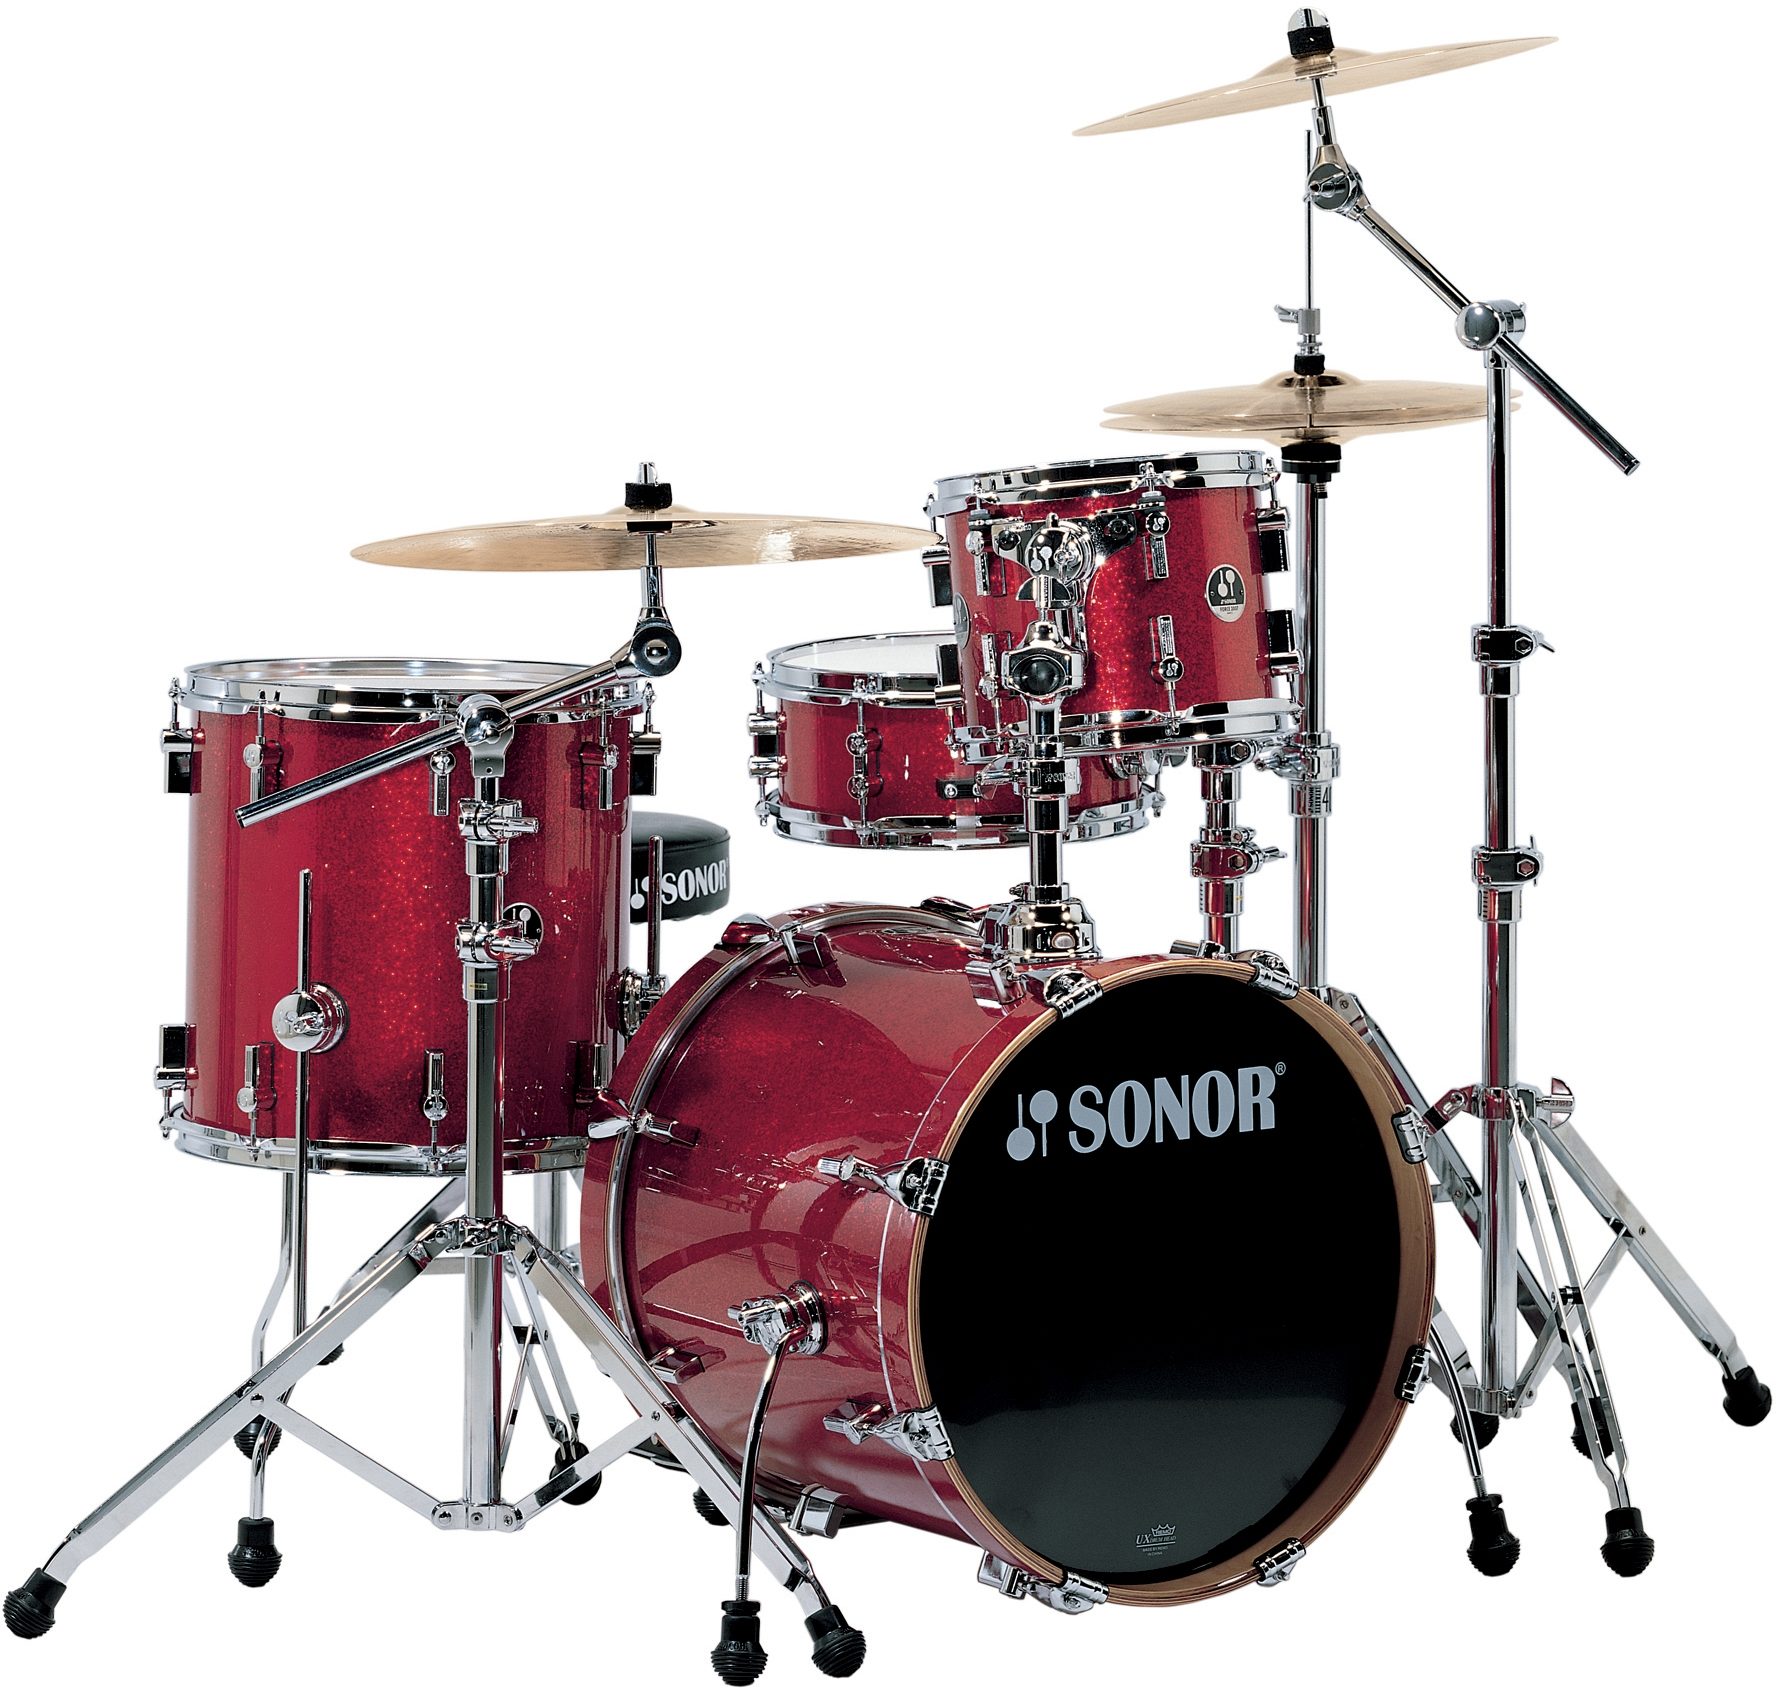 SONOR Sonor Force 3007 Maple Snare Drum 14 X 5.5 